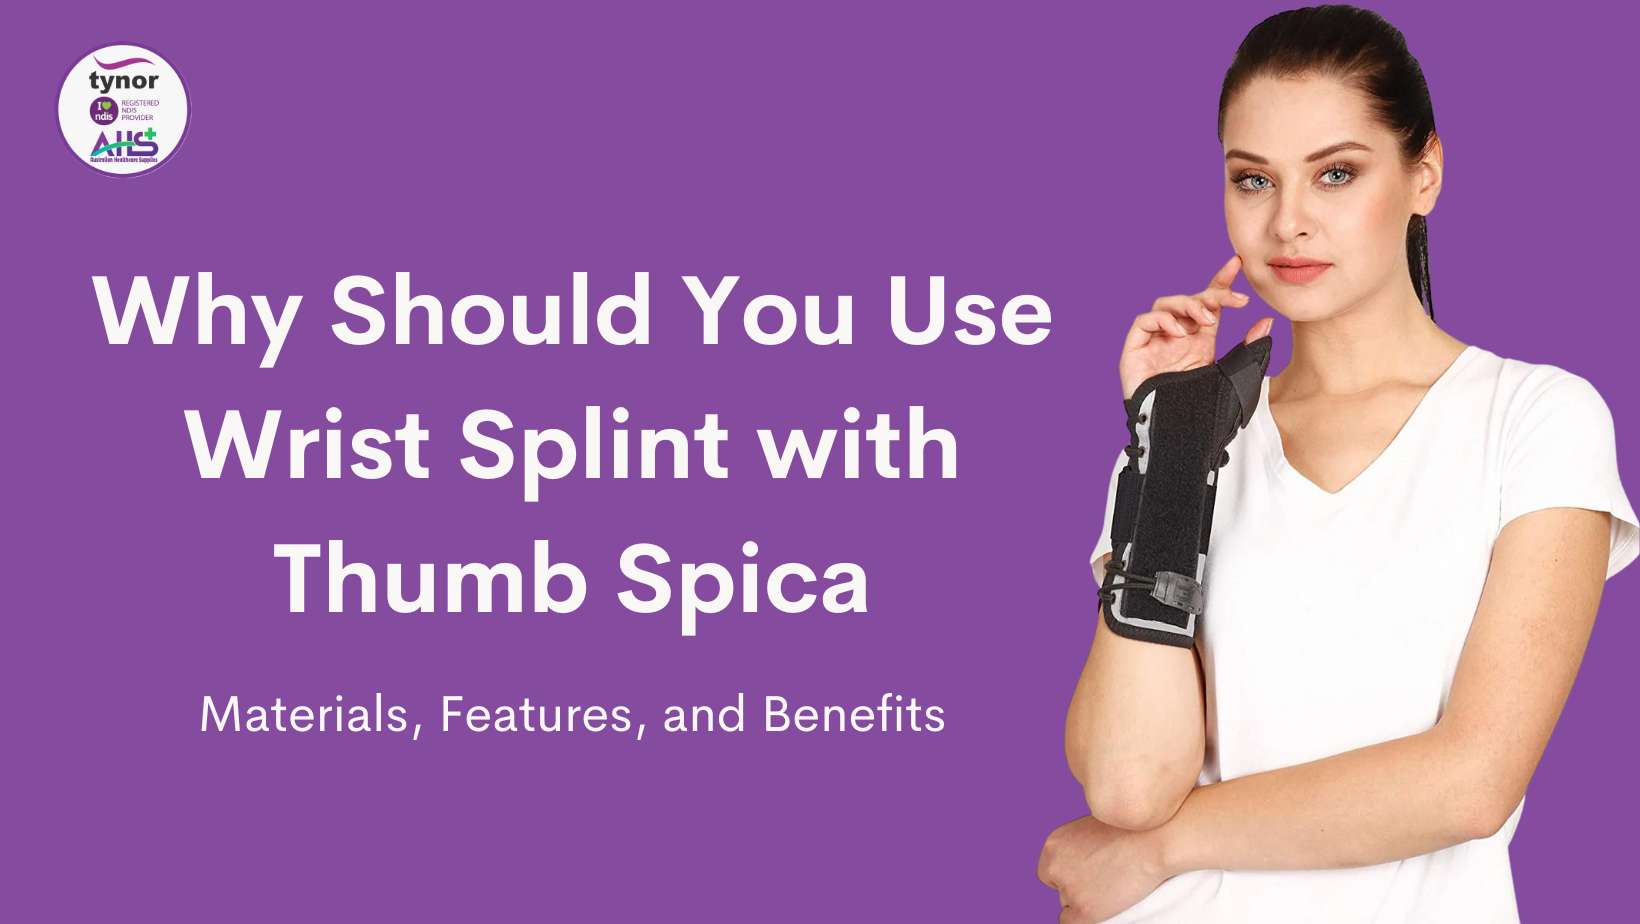 Why Should You Buy an Wrist Splint with Thumb Spica?